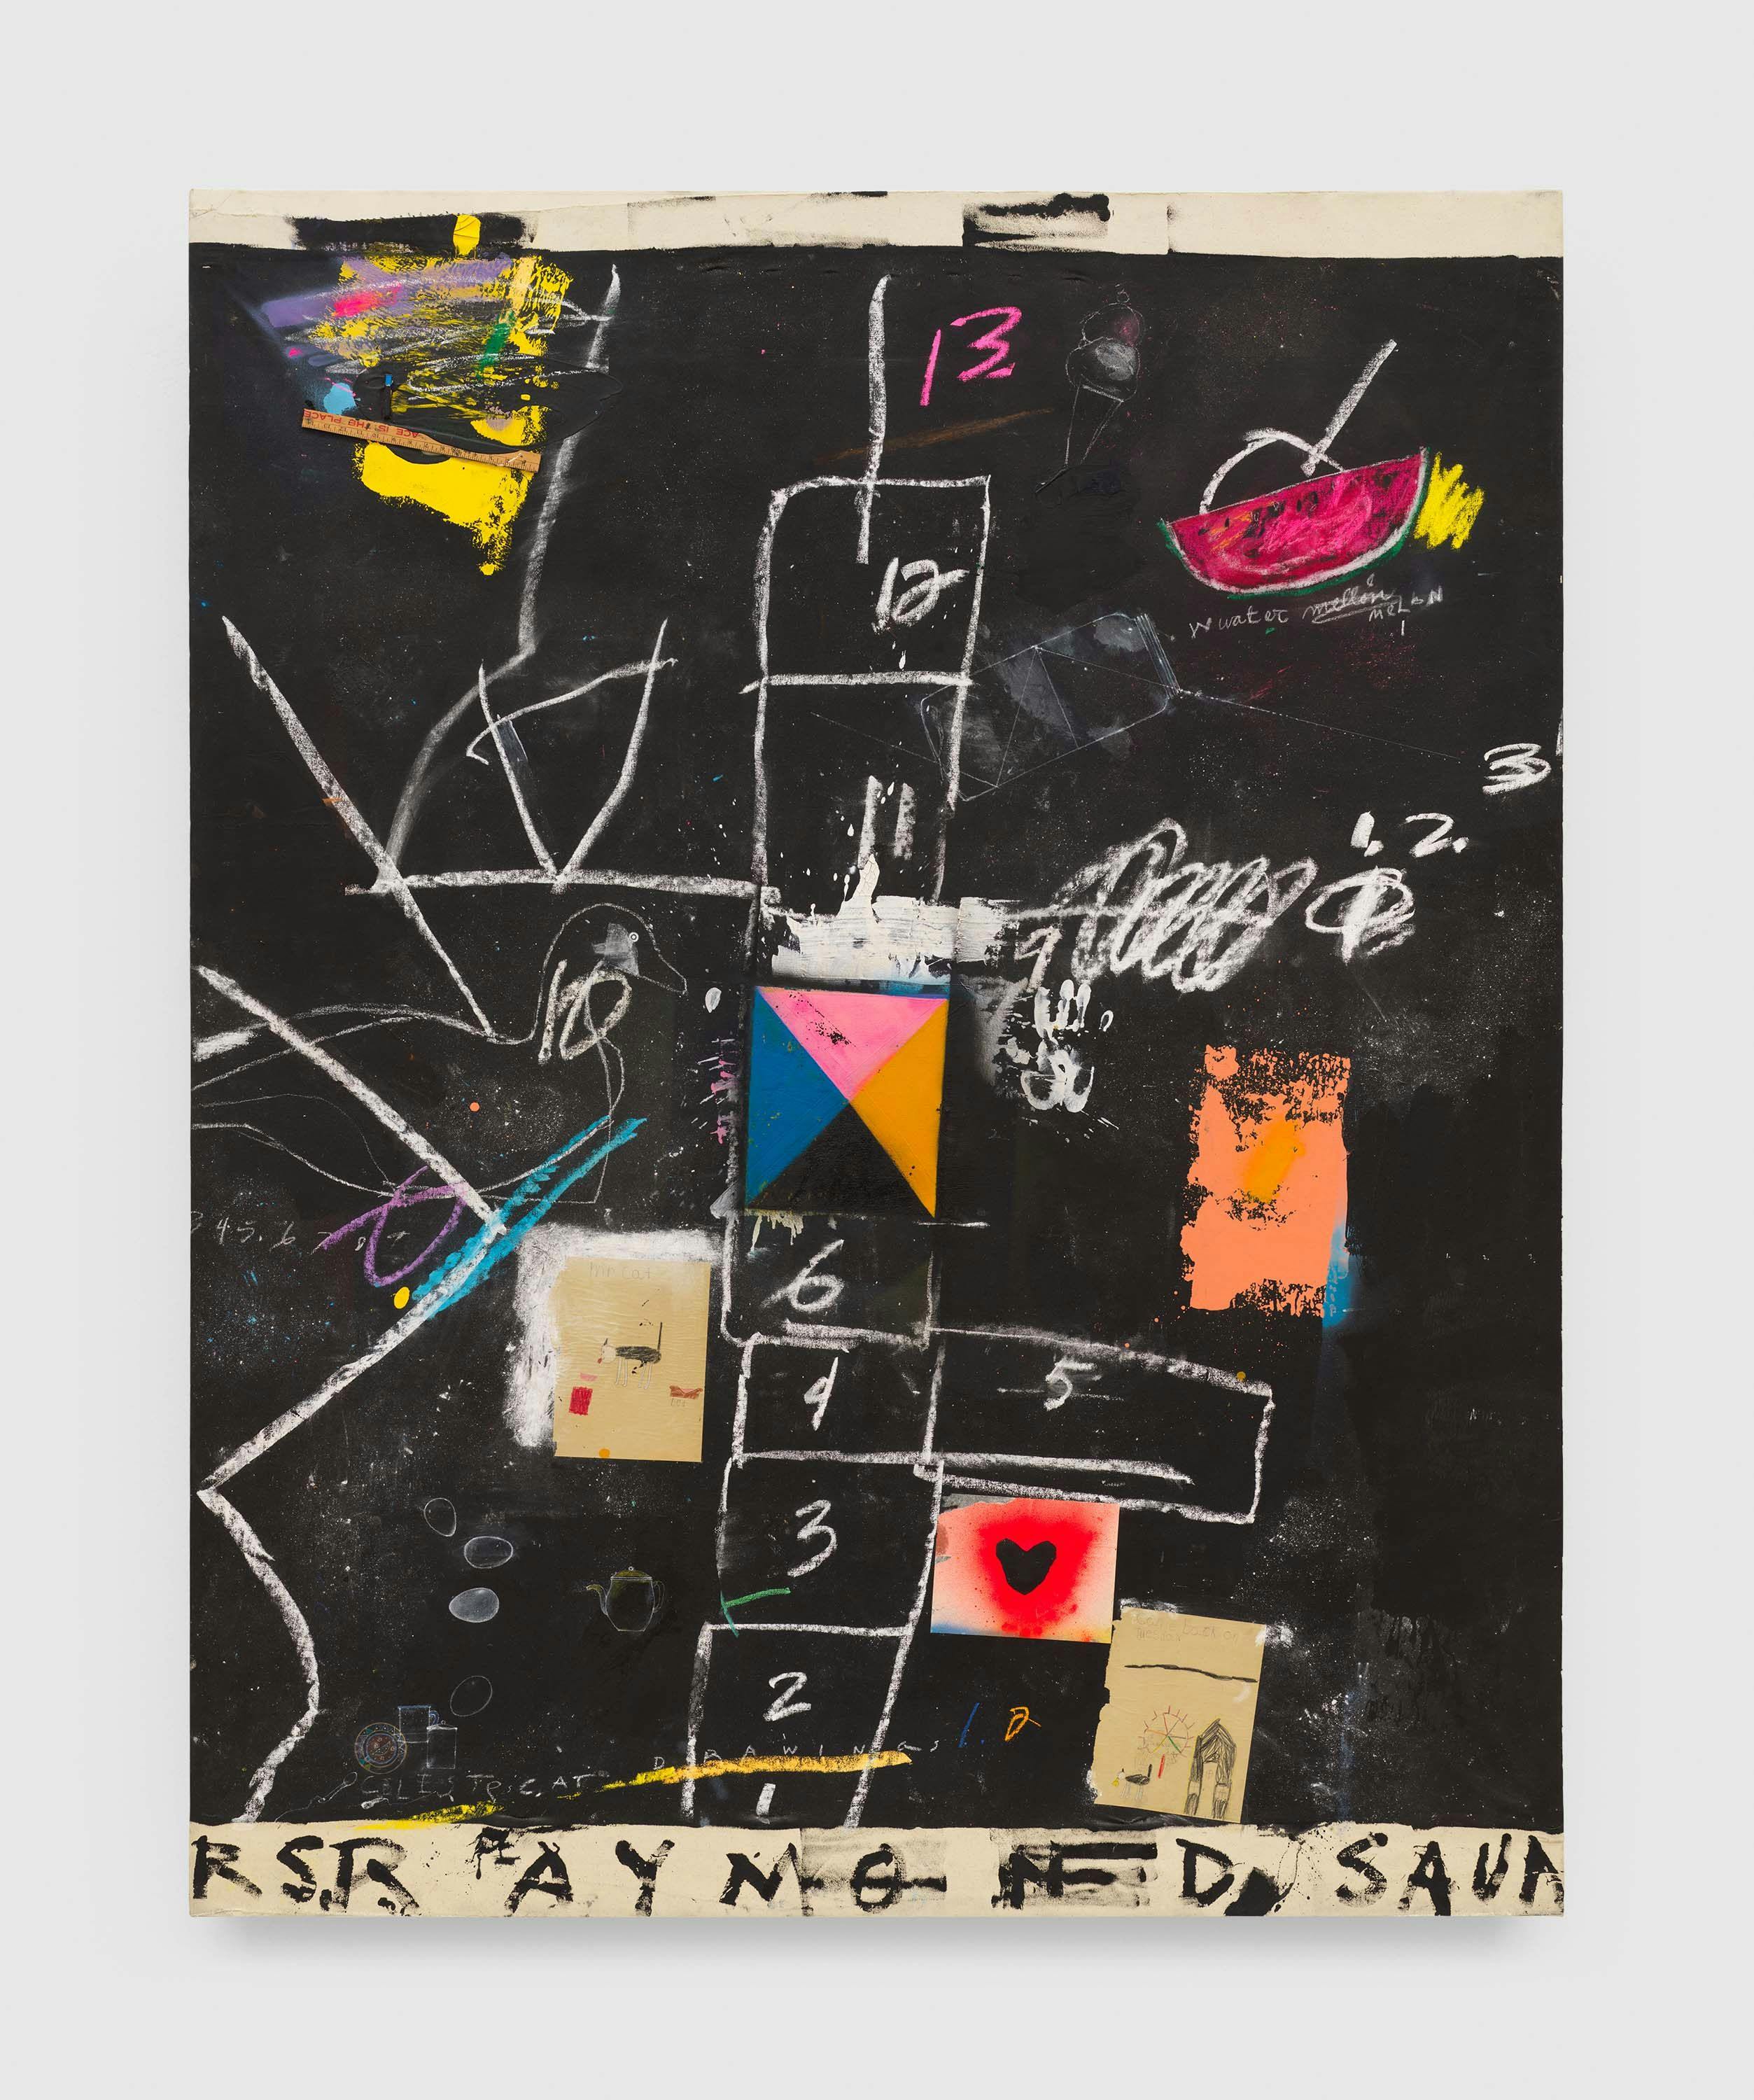 A mixed media artwork by Raymond Saunders, titled Celeste Age 5 Invited Me To Tea, dated 1986. 